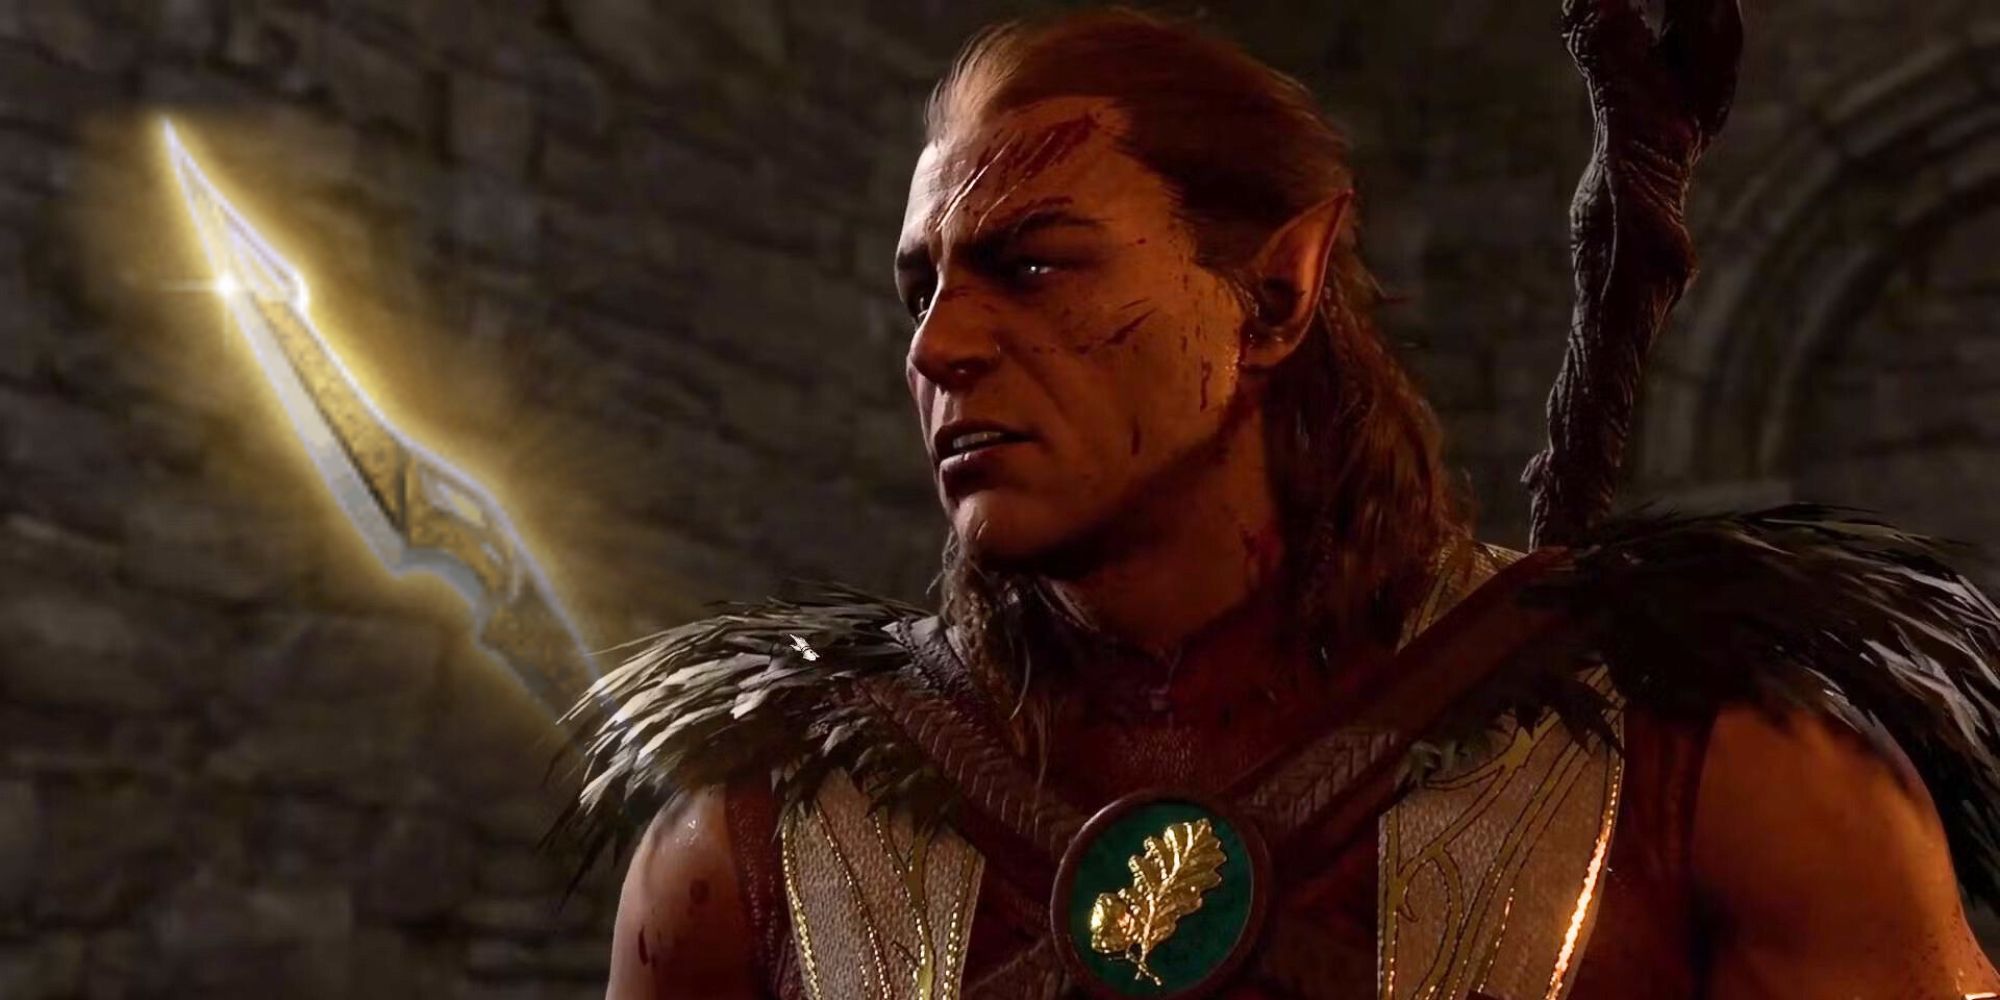 A picture of Halsin with the Glaive Sorrow next to him in Baldur's Gate 3